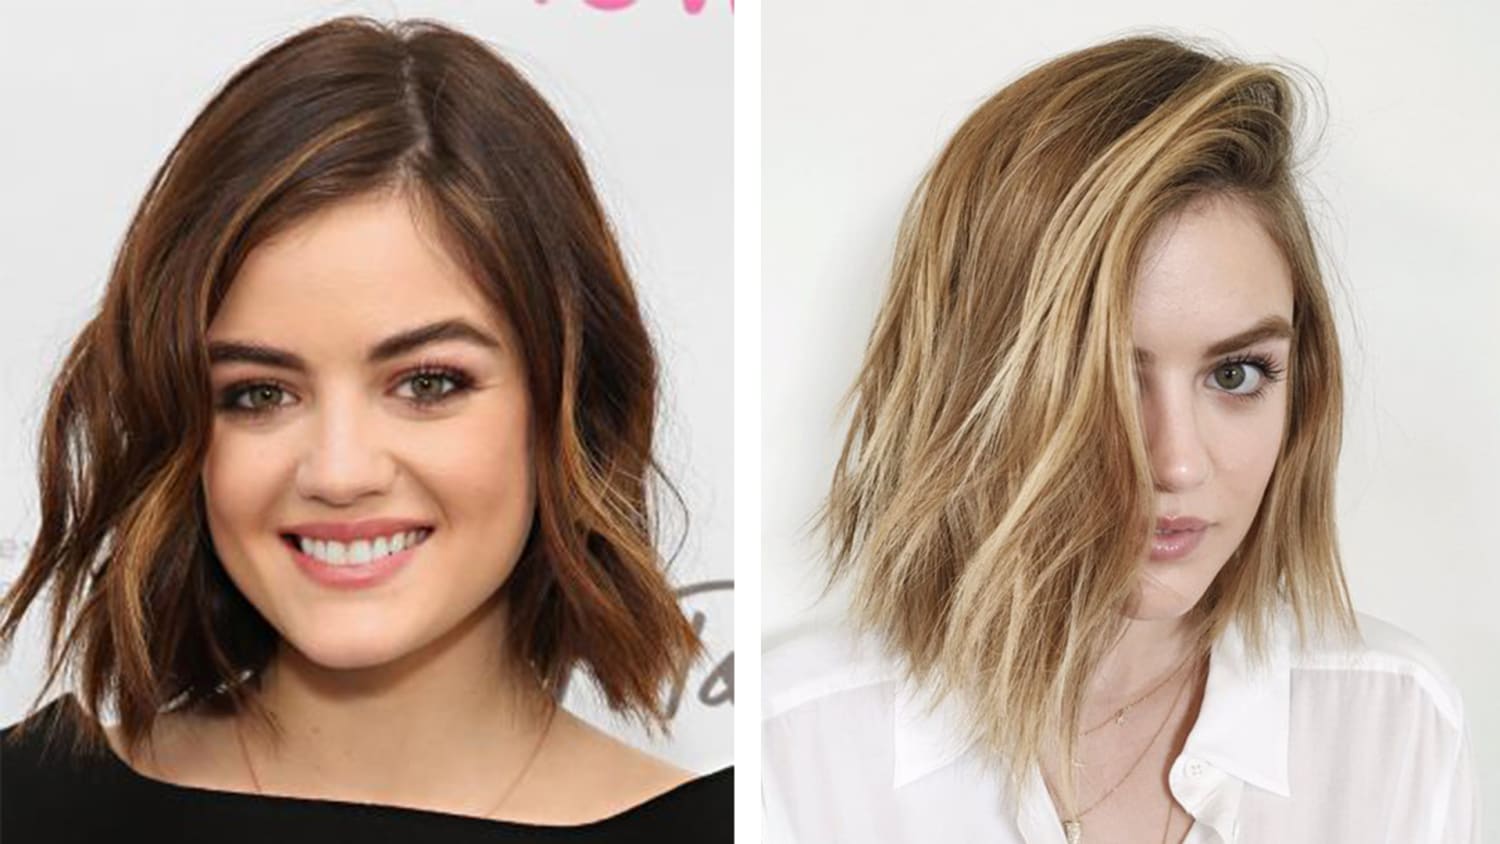 Lucy Hale | 'Hearts Blowpro' Campaign 2015: | Lucy hale short hair, Short  hair styles, Wavy bob hairstyles